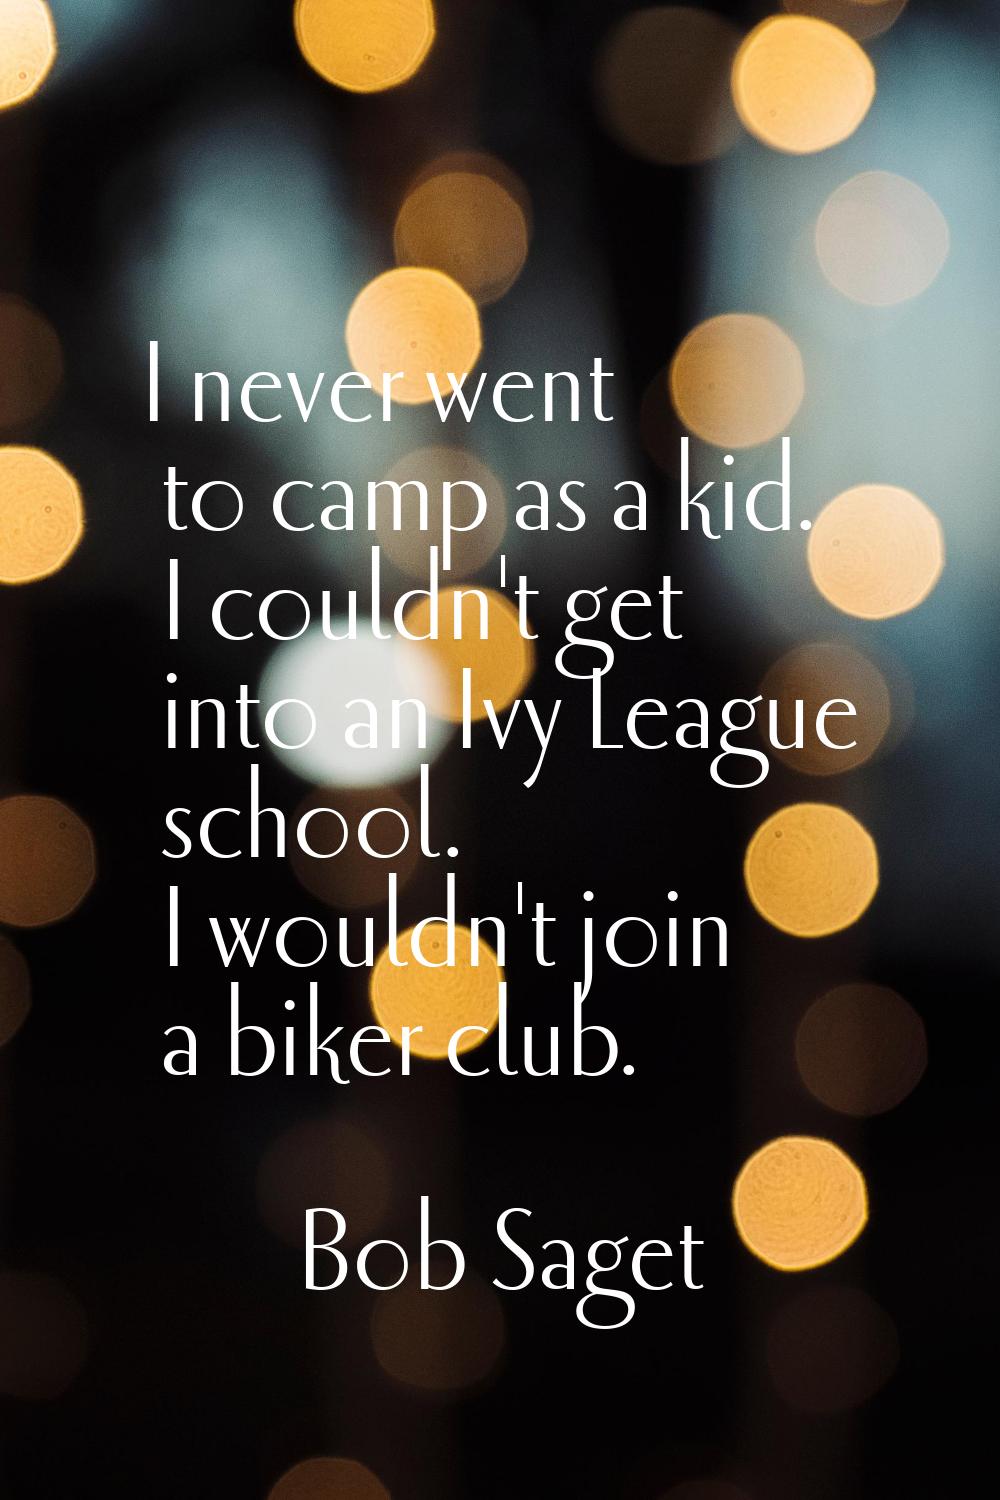 I never went to camp as a kid. I couldn't get into an Ivy League school. I wouldn't join a biker cl